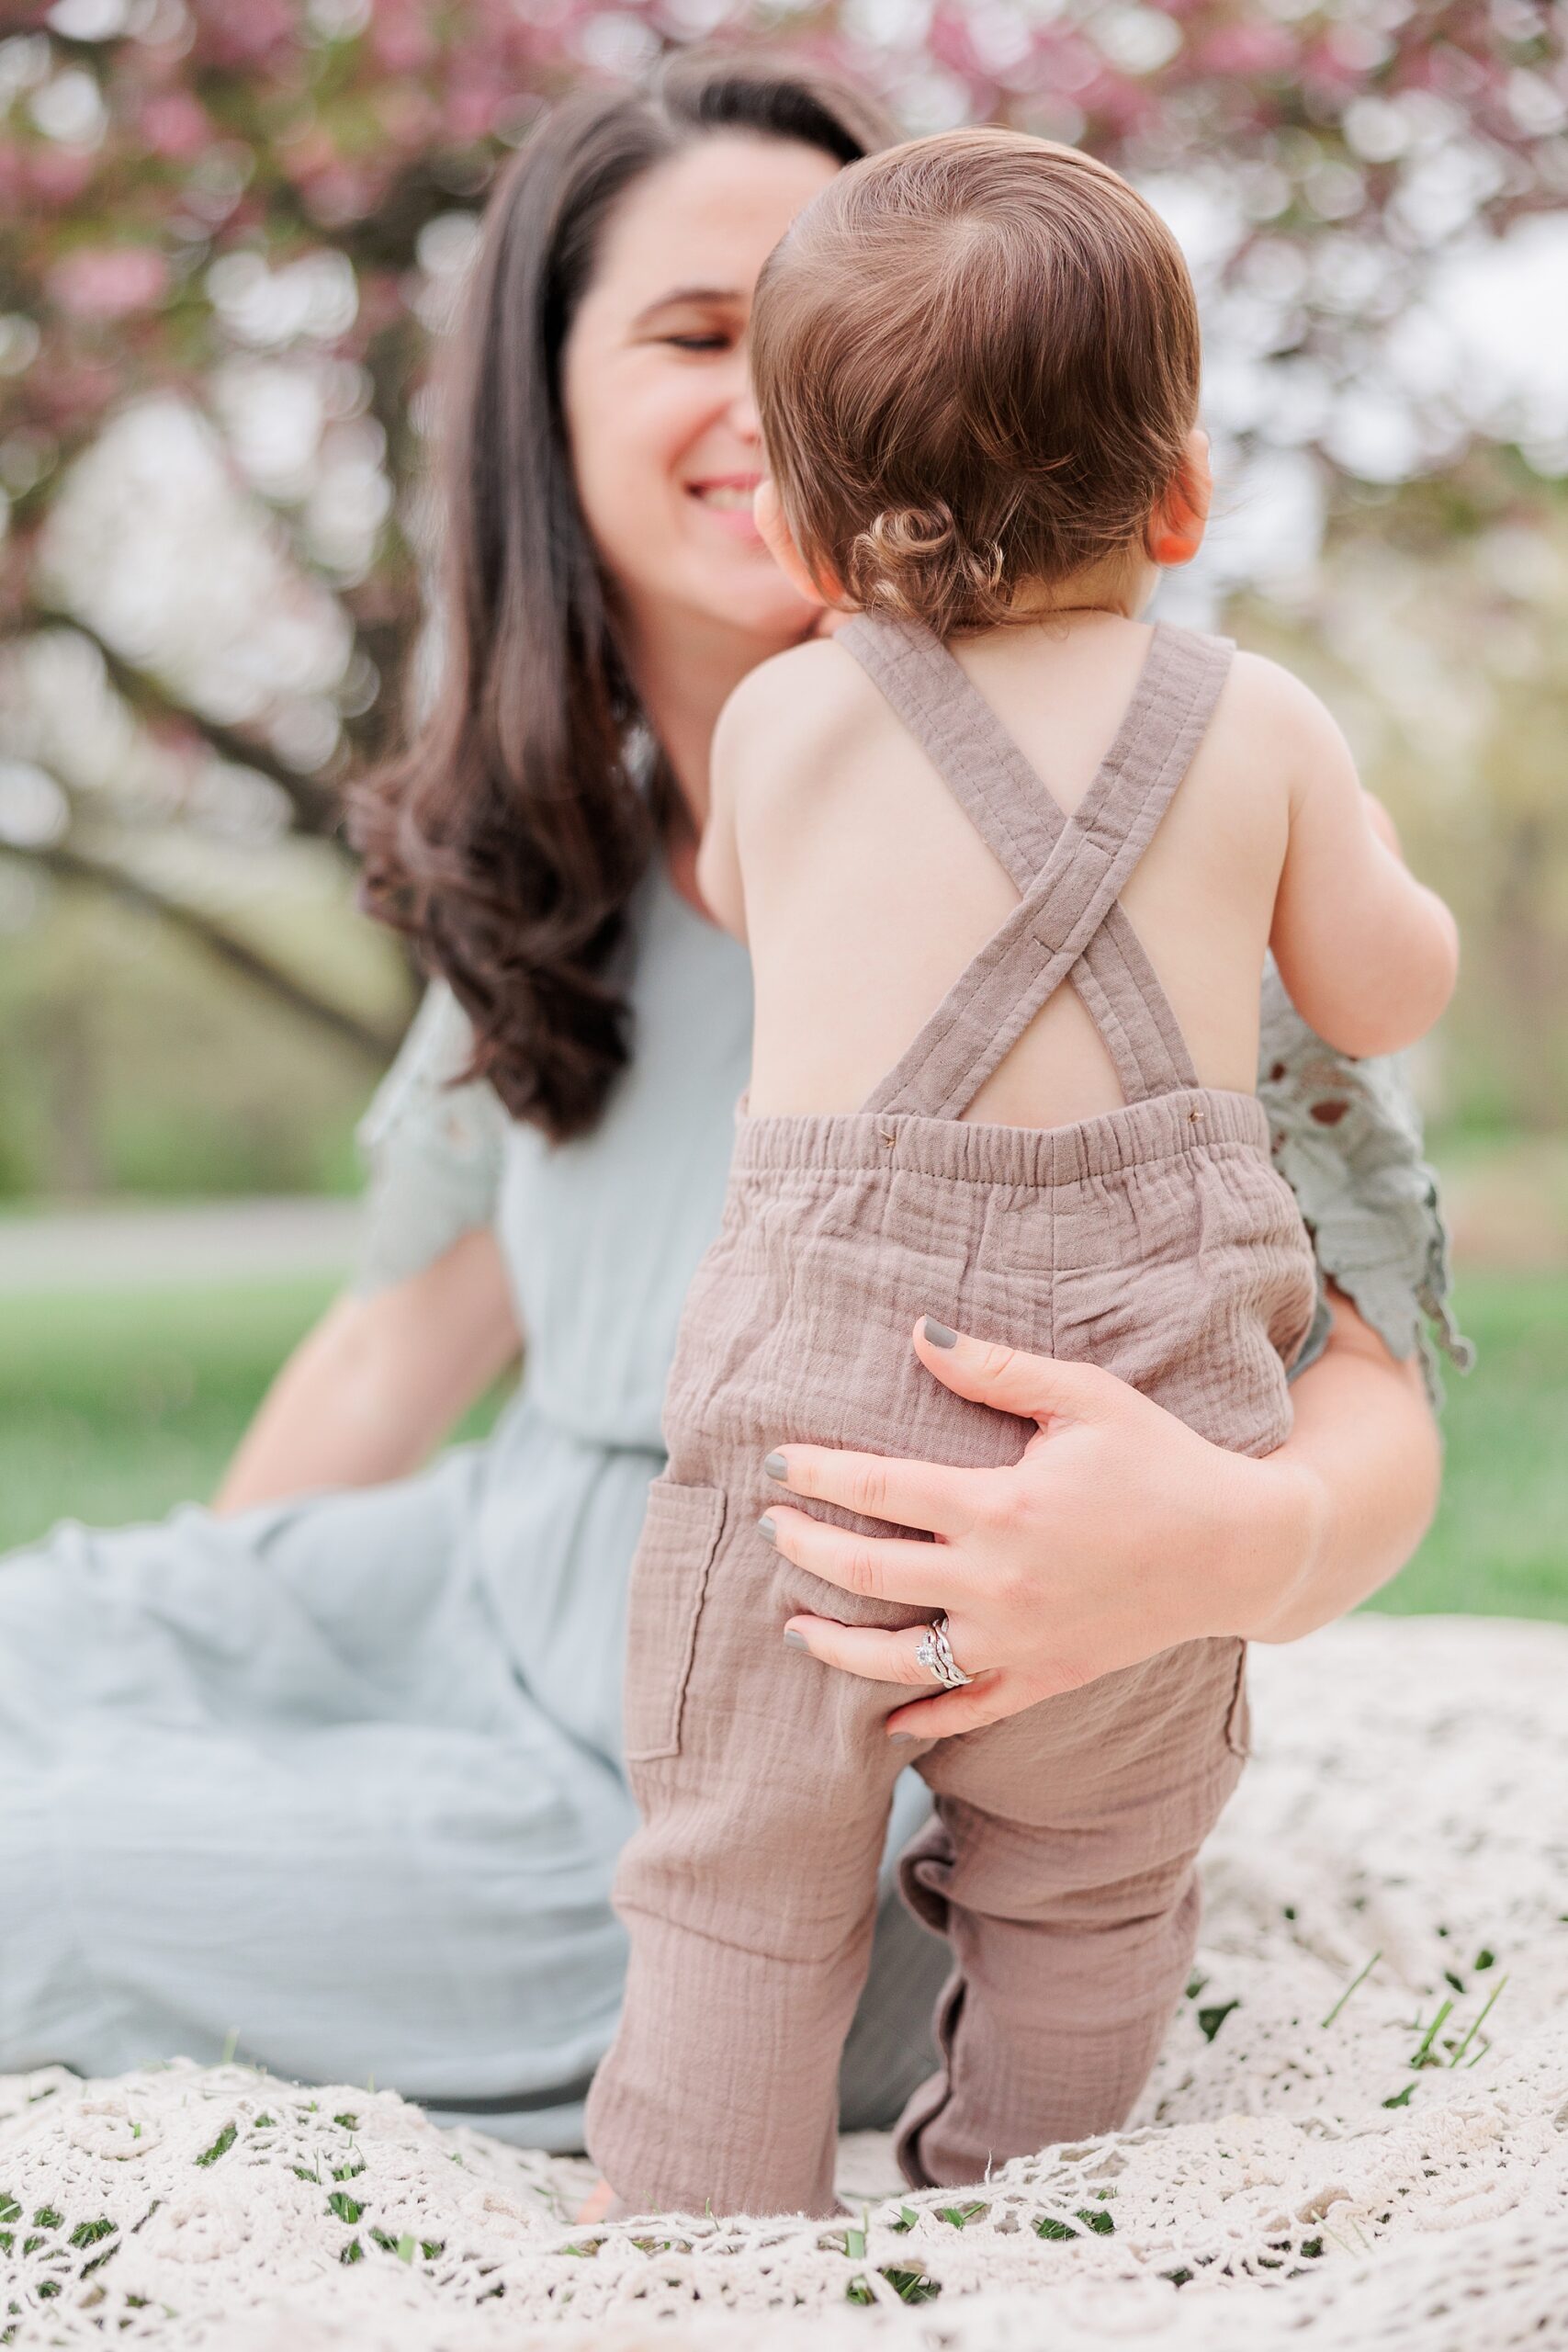 mom holds baby around hips during family photos on blanket